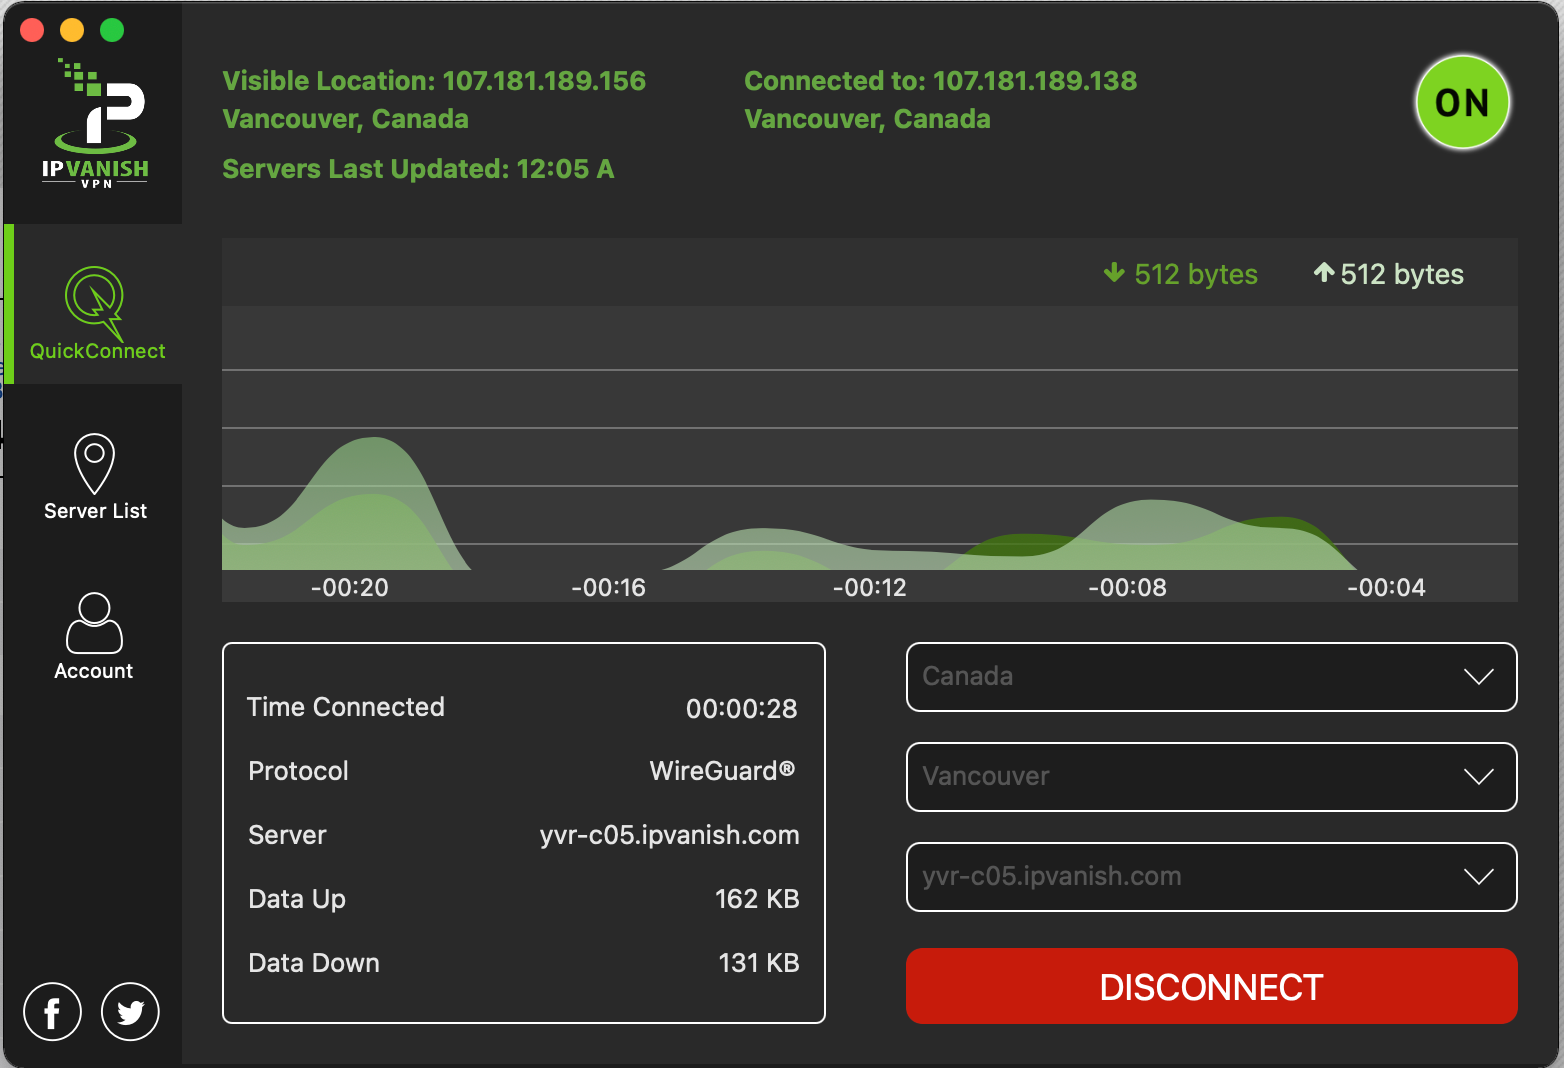 A desktop view of the IPVanish VPN interface. The UI looks dated, with green text on a black and dark gray background, large buttons, and a graph showing download and upload speeds.